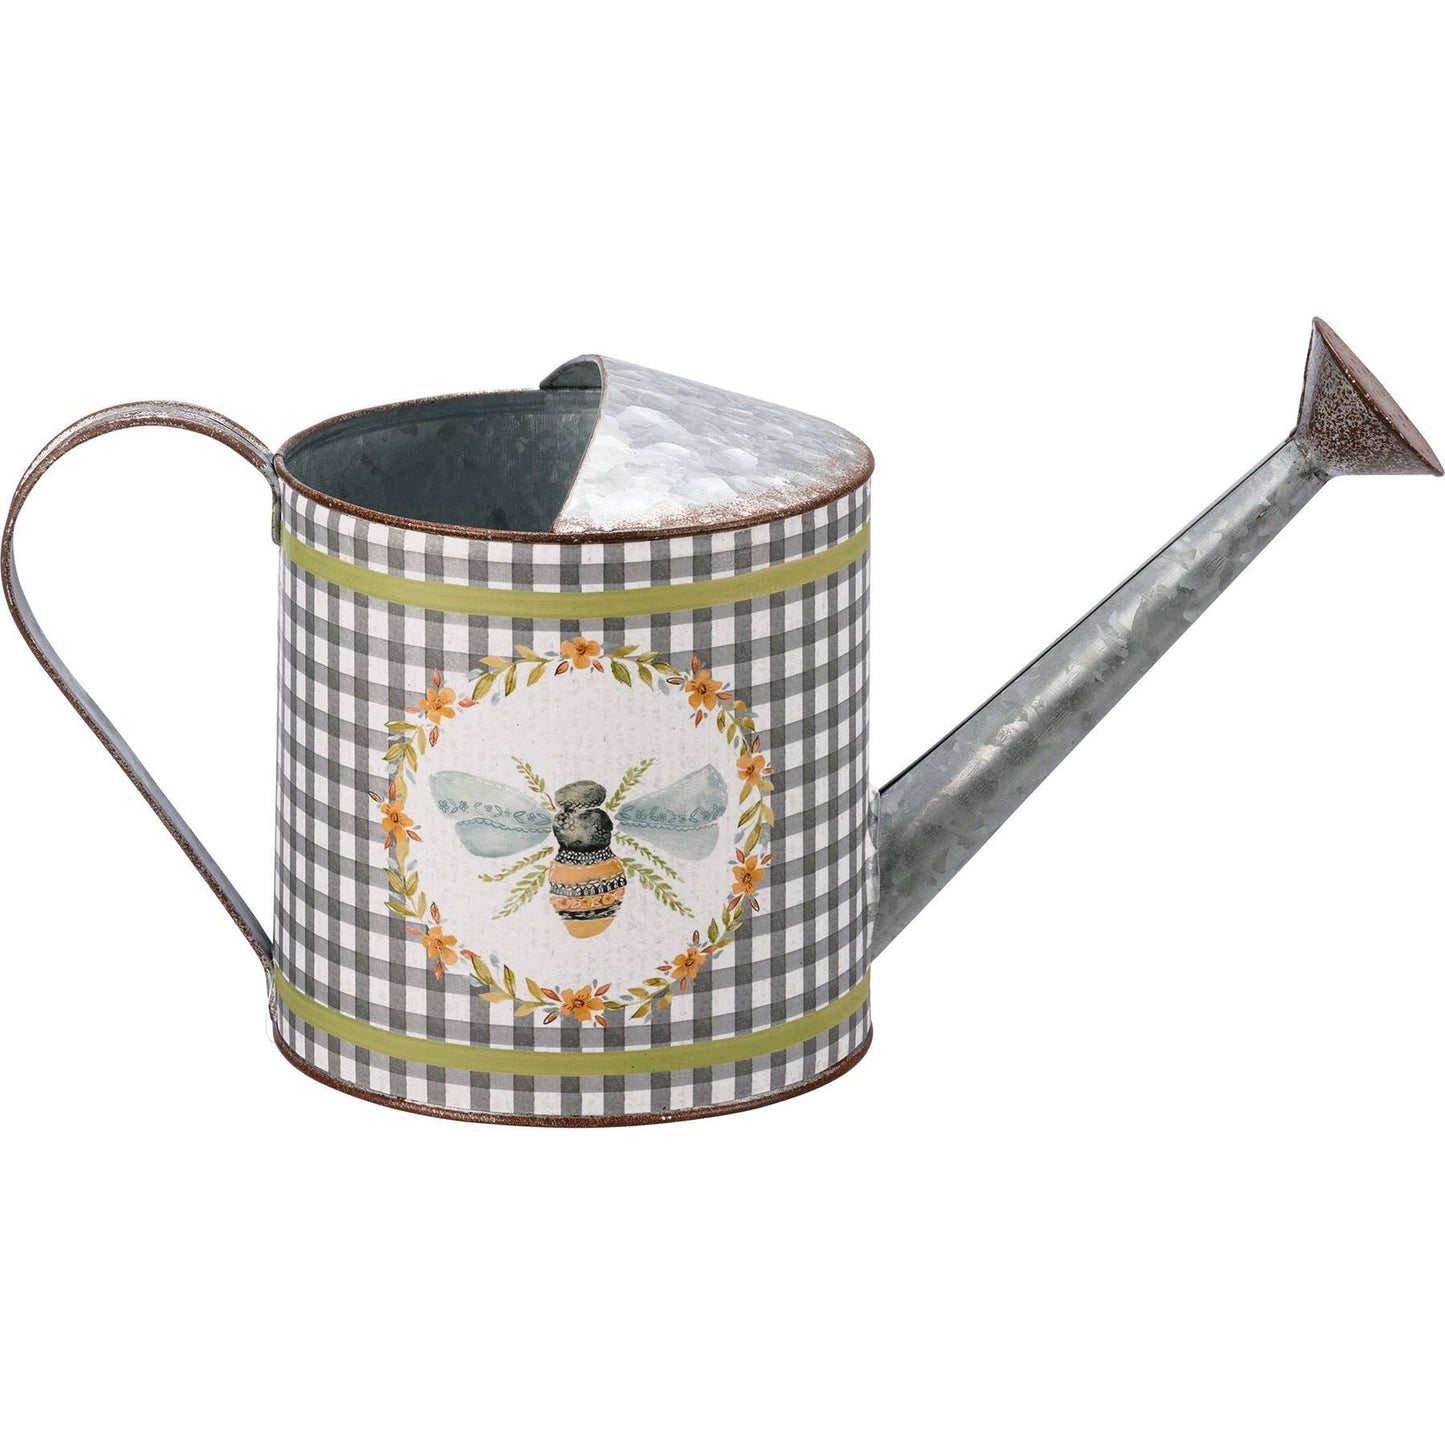 Bee Watering Can